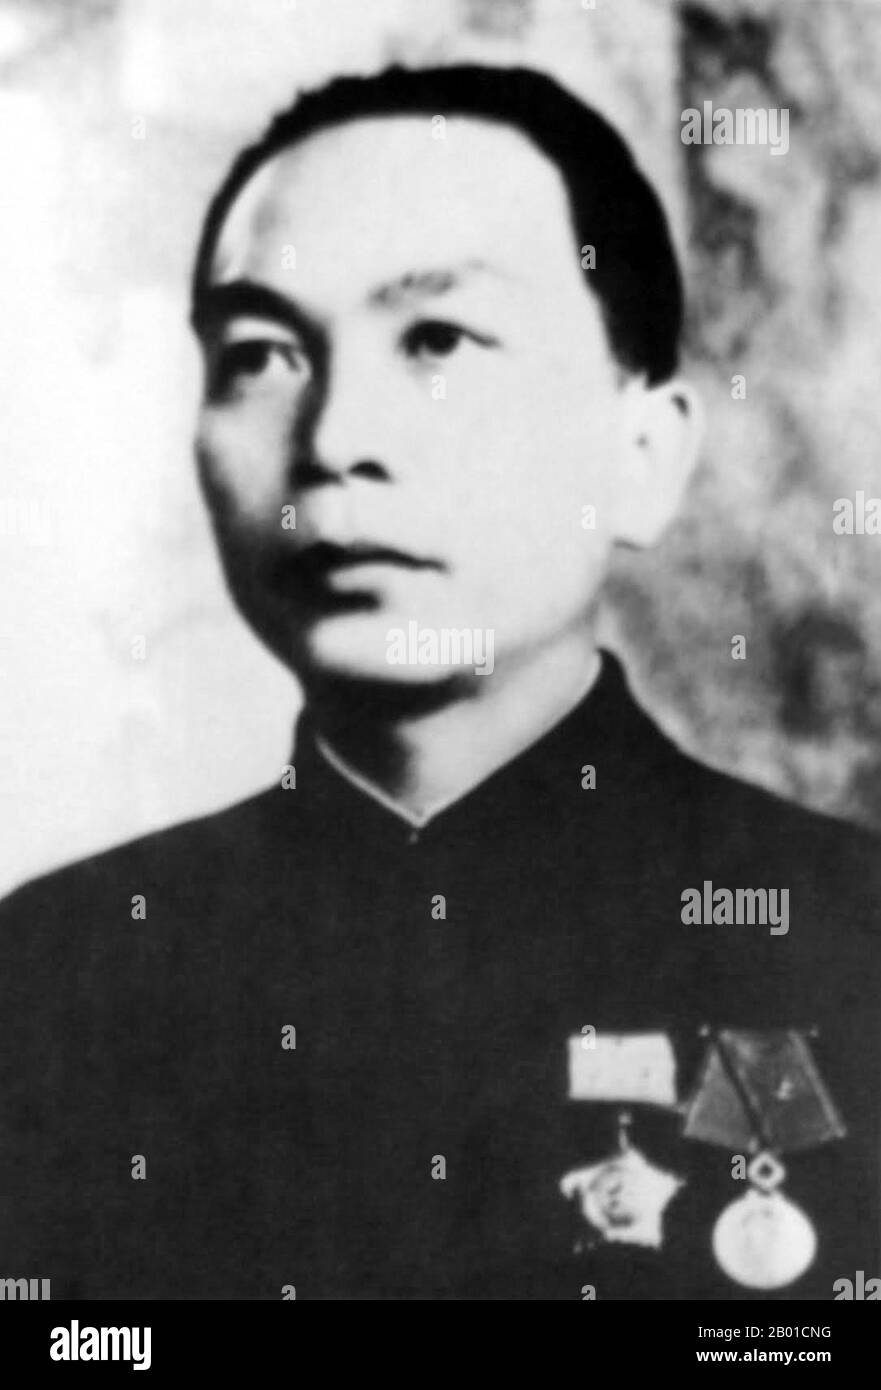 Vietnam: General Vo Nguyen Giap (25 August 1911 - 4 October 2013), Victor of Dien Bien Phu, c. 1960-1963.  Vo Nguyen Giap (Vietnamese: Võ Nguyên Giáp) was a Vietnamese officer in the Vietnam People's Army and a politician. He was a principal commander in two wars: the First Indochina War (1946-1954) and the Second Indochina War (1960-1975).  He was also a journalist, an interior minister in President Hồ Chí Minh’s Việt Minh government, the military commander of the Việt Minh, the commander of the People's Army of Vietnam (PAVN), and defense minister. Stock Photo